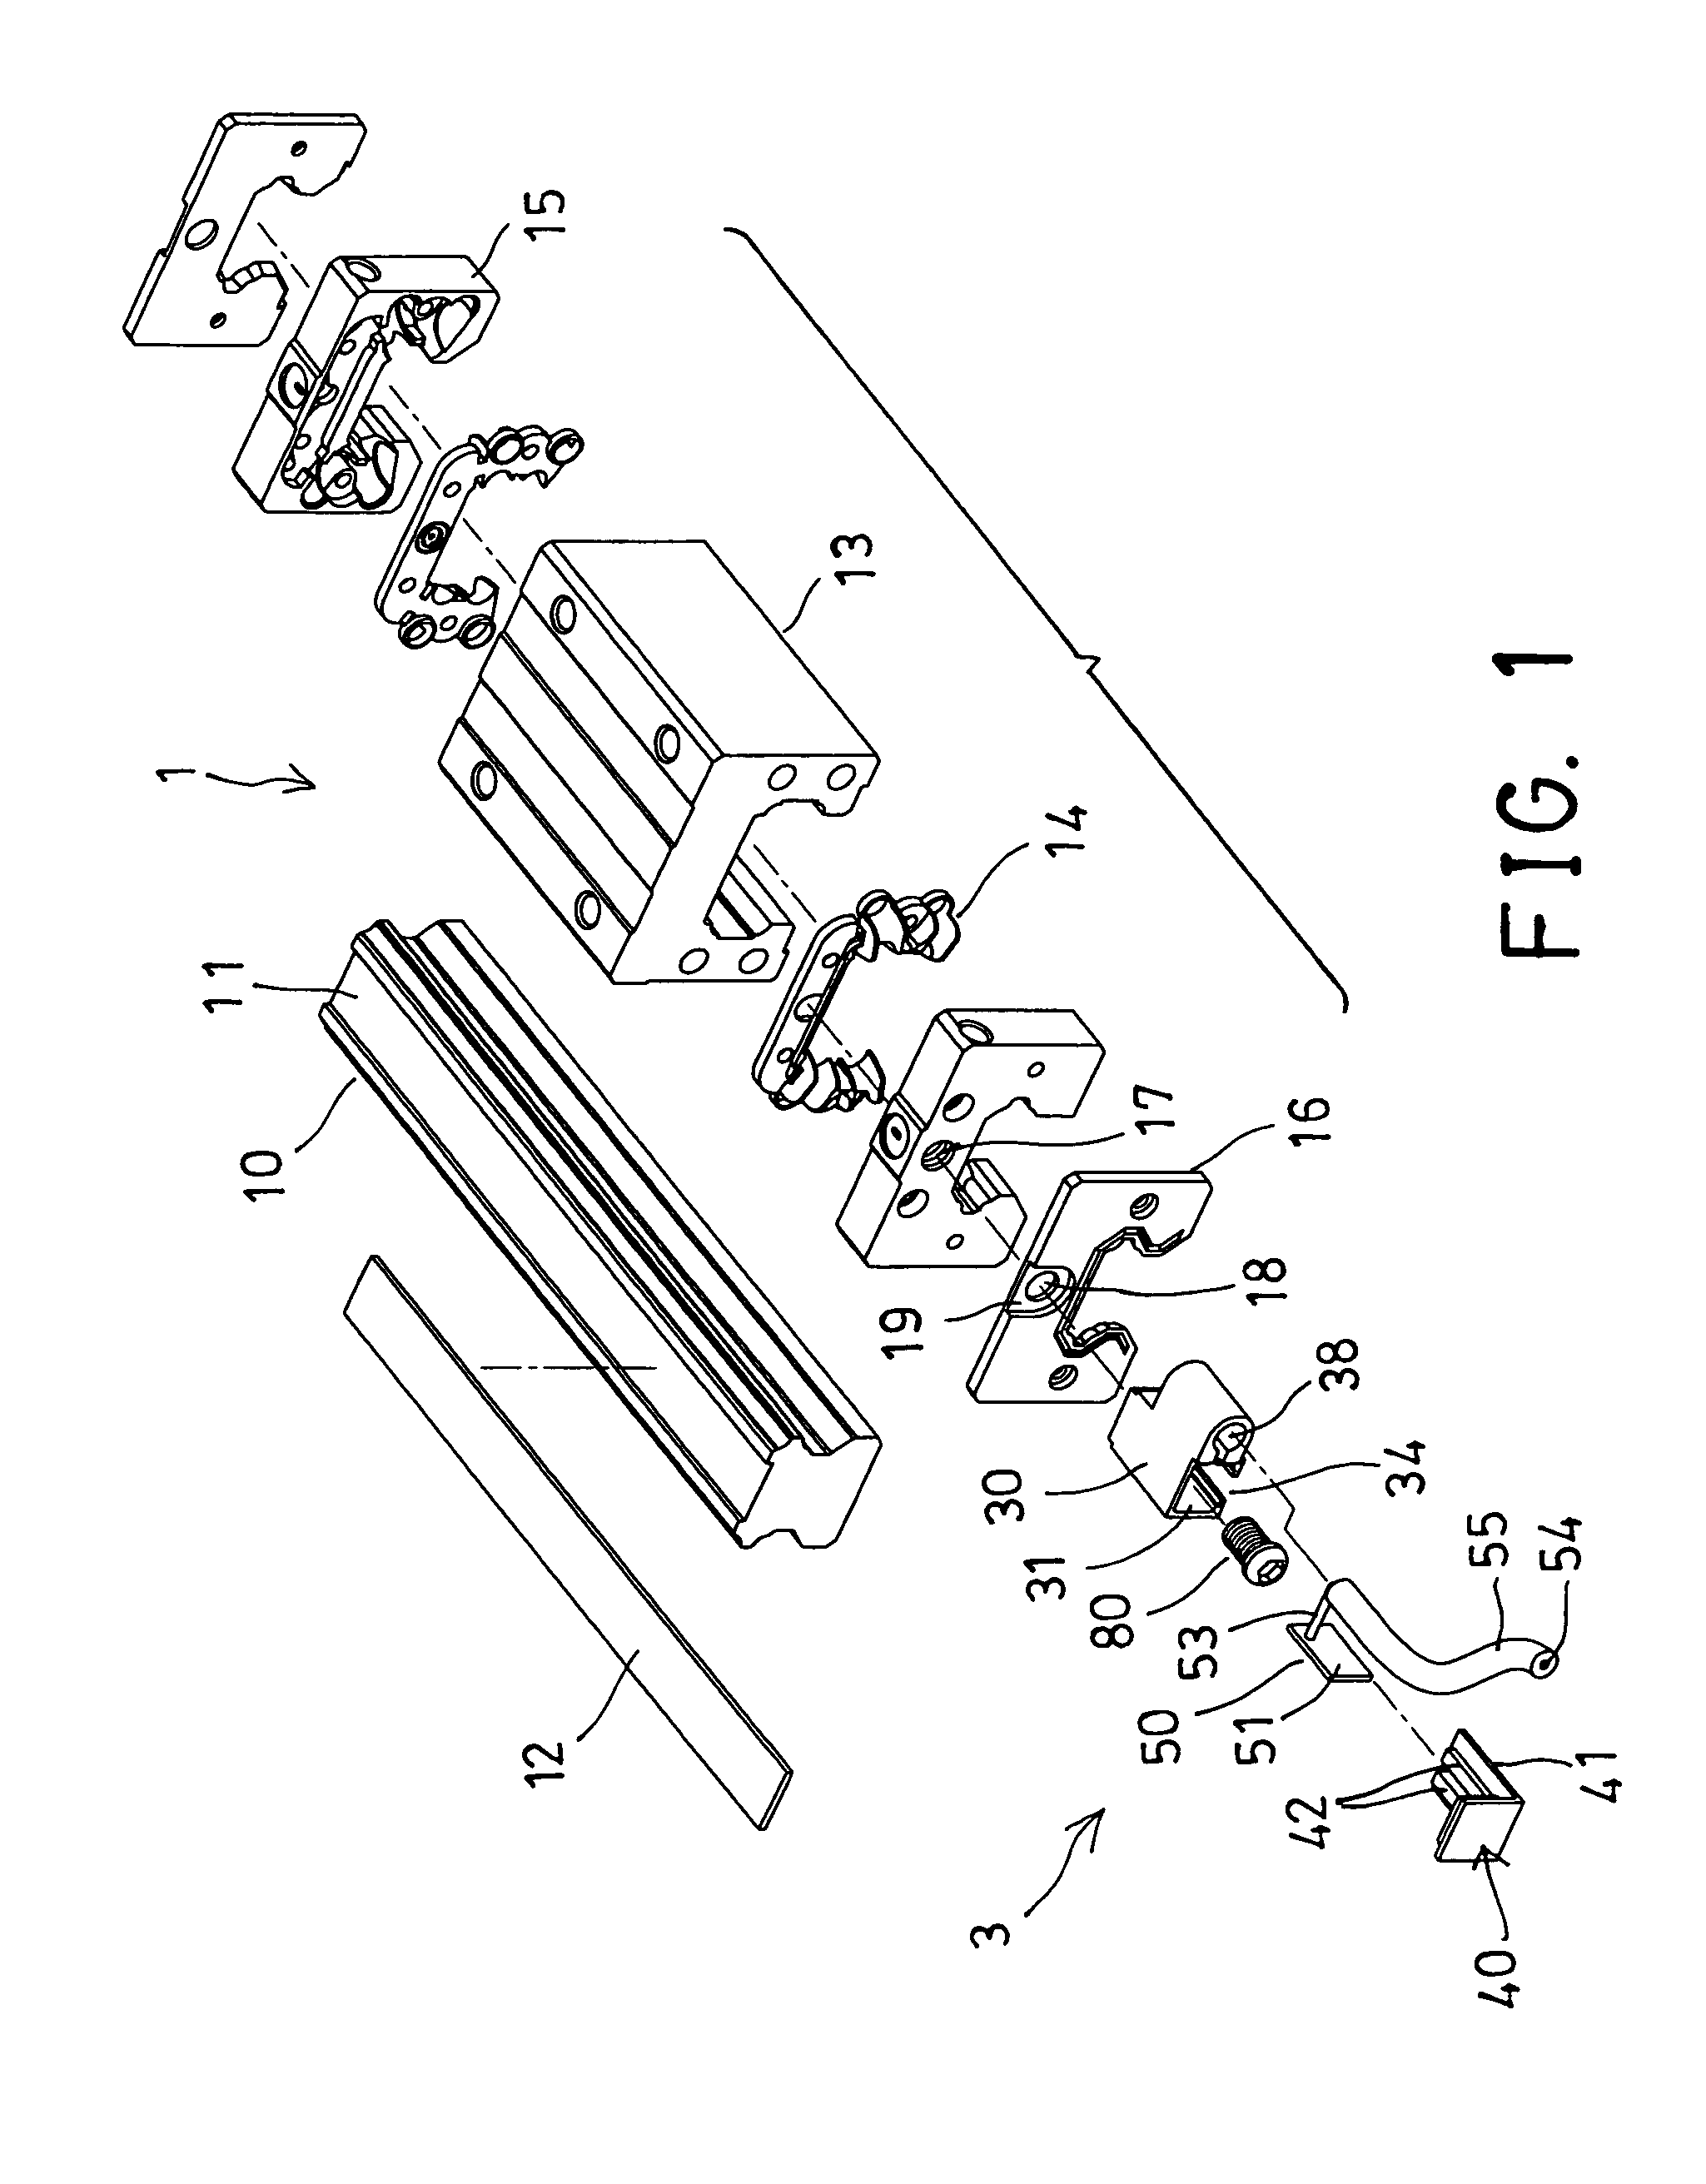 Linear motion guide apparatus having detecting device